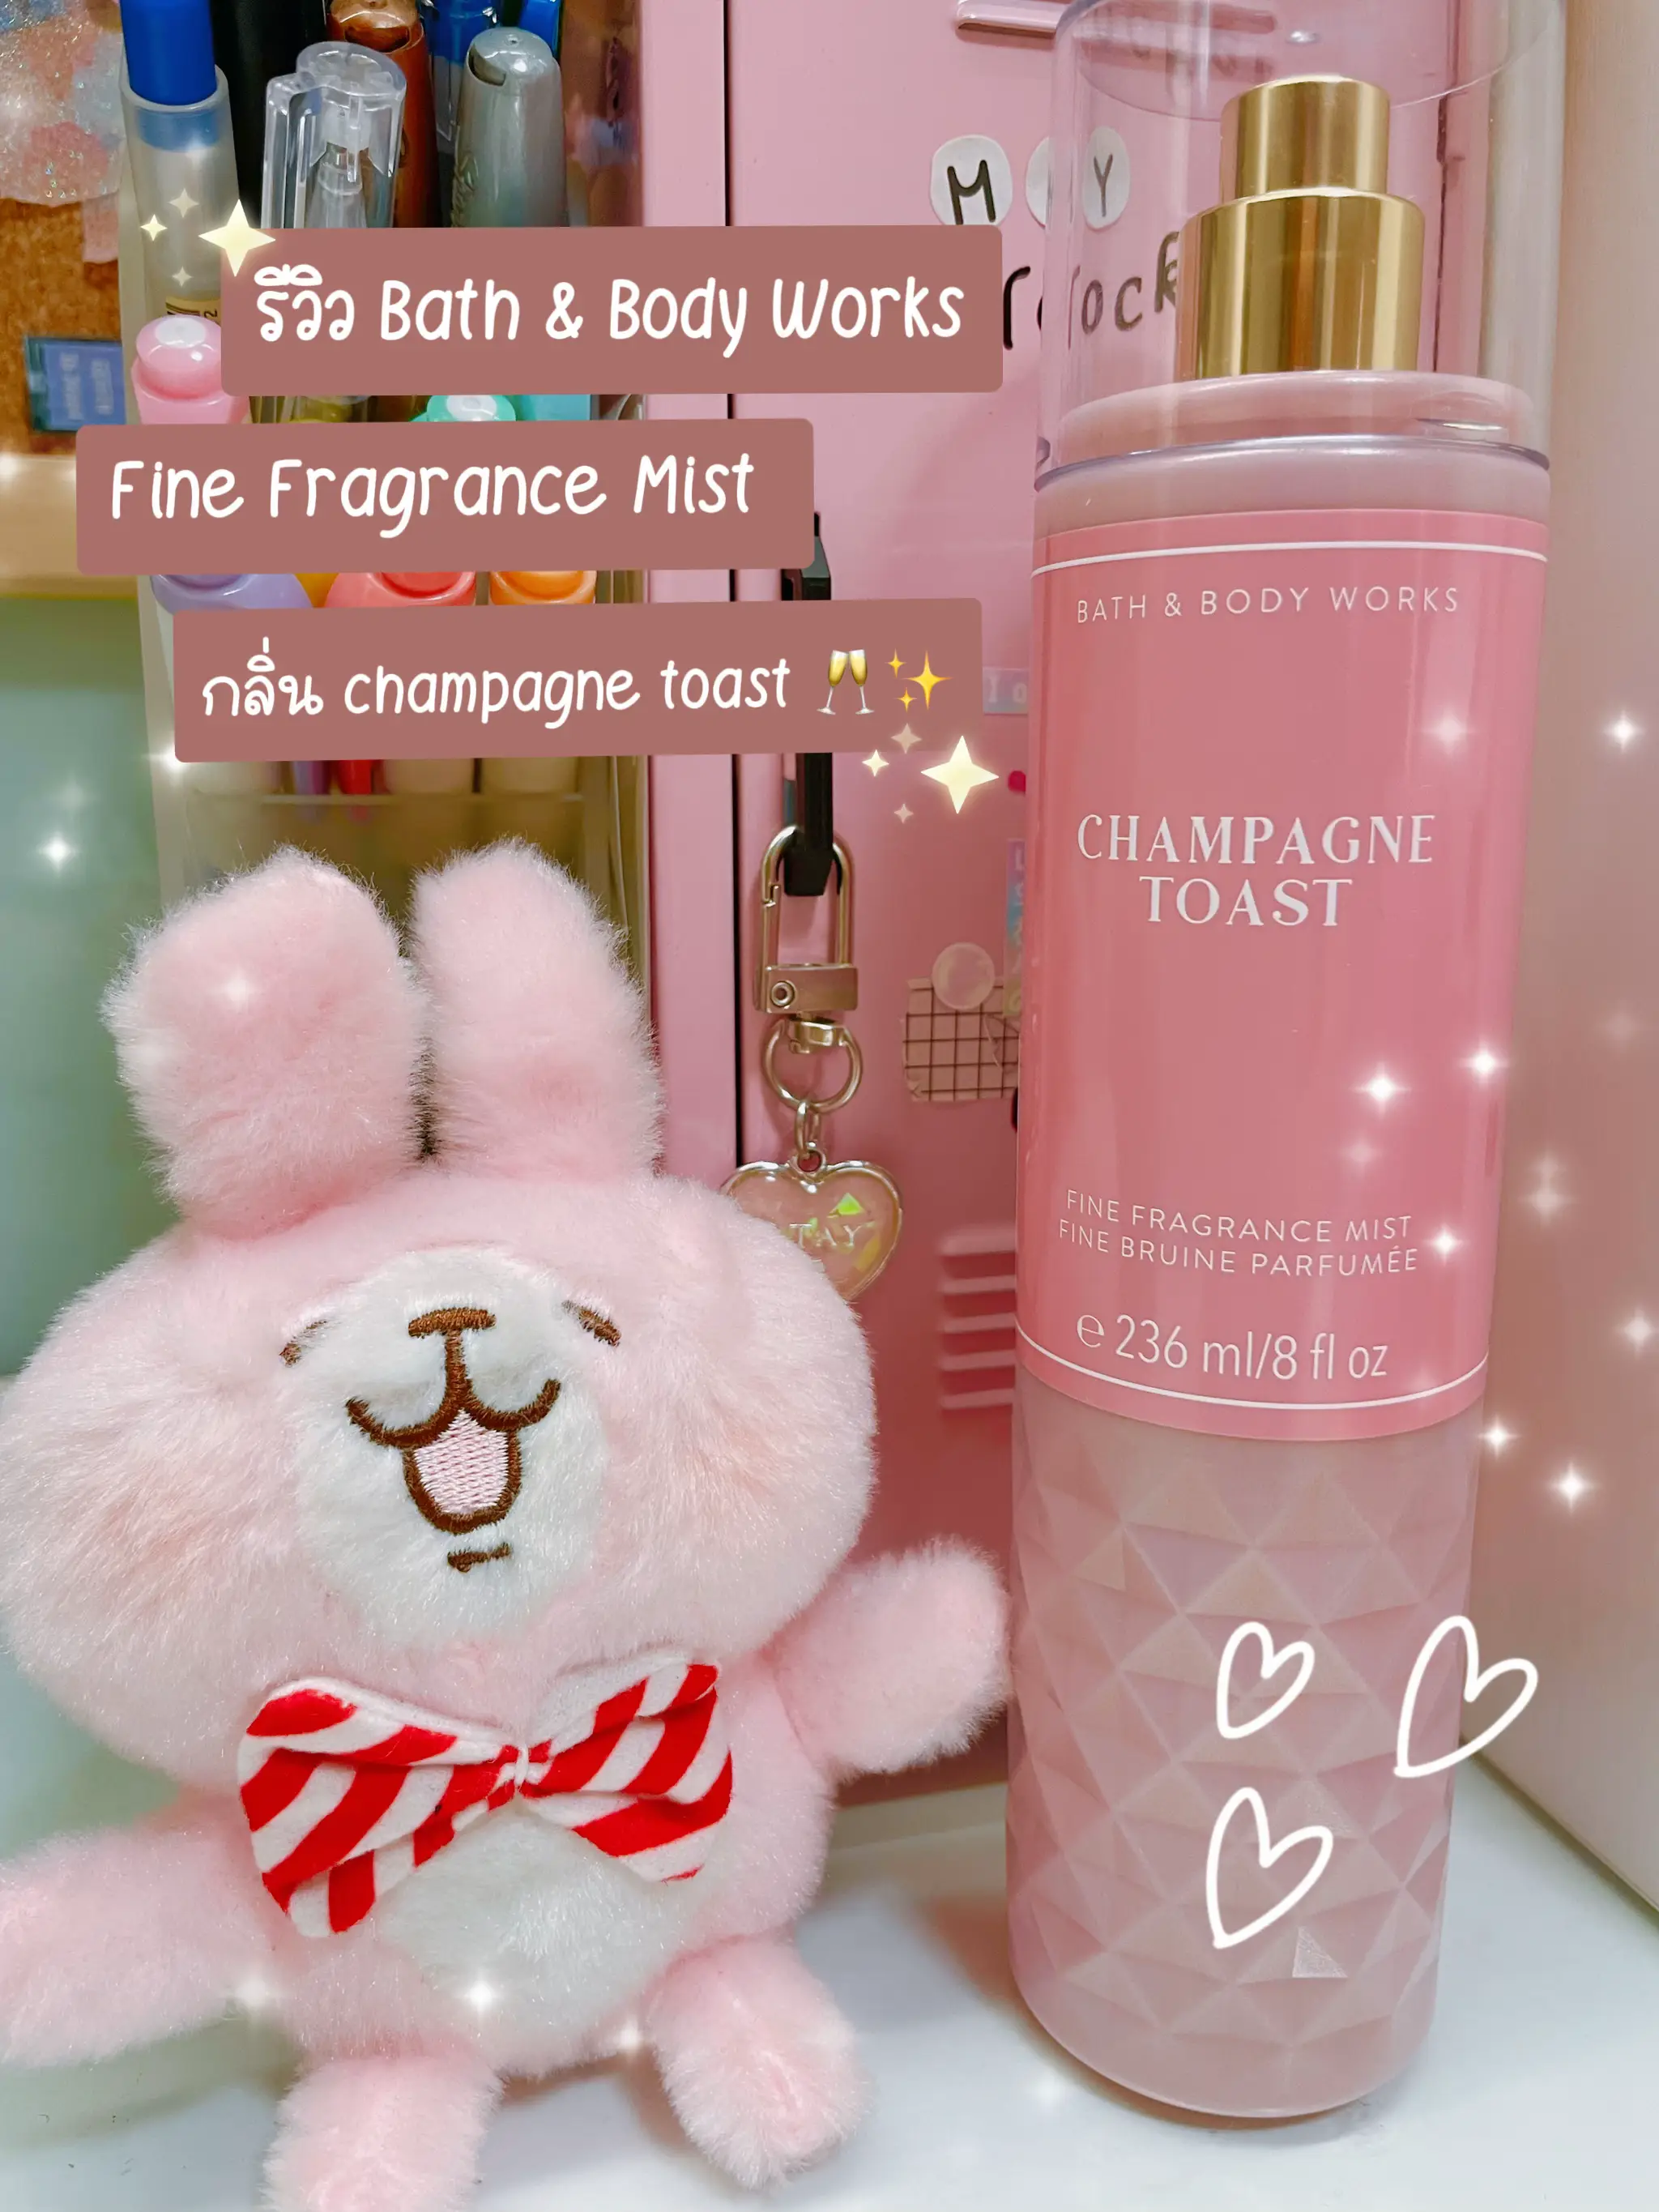 Bath and body works reviews, champagne toast scent